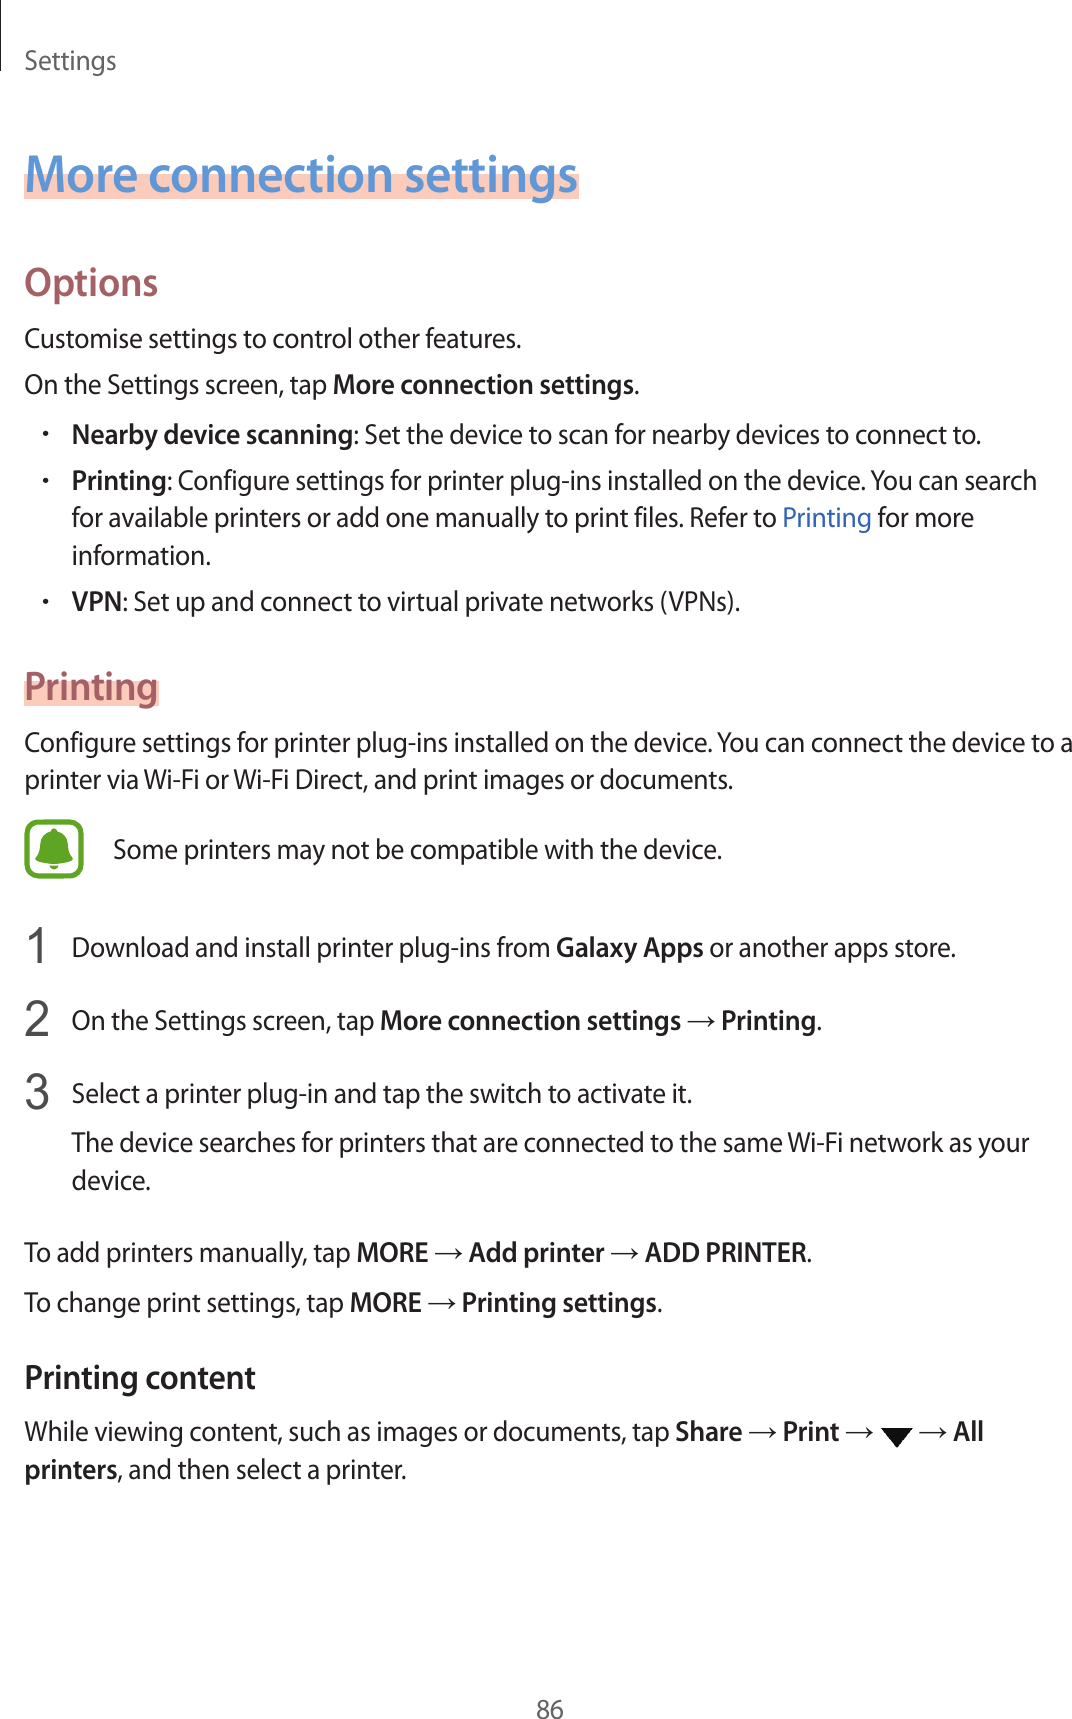 Settings86More connection settingsOptionsCustomise settings to control other features.On the Settings screen, tap More connection settings.•Nearby device scanning: Set the device to scan for nearby devices to connect to.•Printing: Configure settings for printer plug-ins installed on the device. You can search for available printers or add one manually to print files. Refer to Printing for more information.•VPN: Set up and connect to virtual private networks (VPNs).PrintingConfigure settings for printer plug-ins installed on the device. You can connect the device to a printer via Wi-Fi or Wi-Fi Direct, and print images or documents.Some printers may not be compatible with the device.1  Download and install printer plug-ins from Galaxy Apps or another apps store.2  On the Settings screen, tap More connection settings → Printing.3  Select a printer plug-in and tap the switch to activate it.The device searches for printers that are connected to the same Wi-Fi network as your device.To add printers manually, tap MORE → Add printer → ADD PRINTER.To change print settings, tap MORE → Printing settings.Printing contentWhile viewing content, such as images or documents, tap Share → Print →   → All printers, and then select a printer.